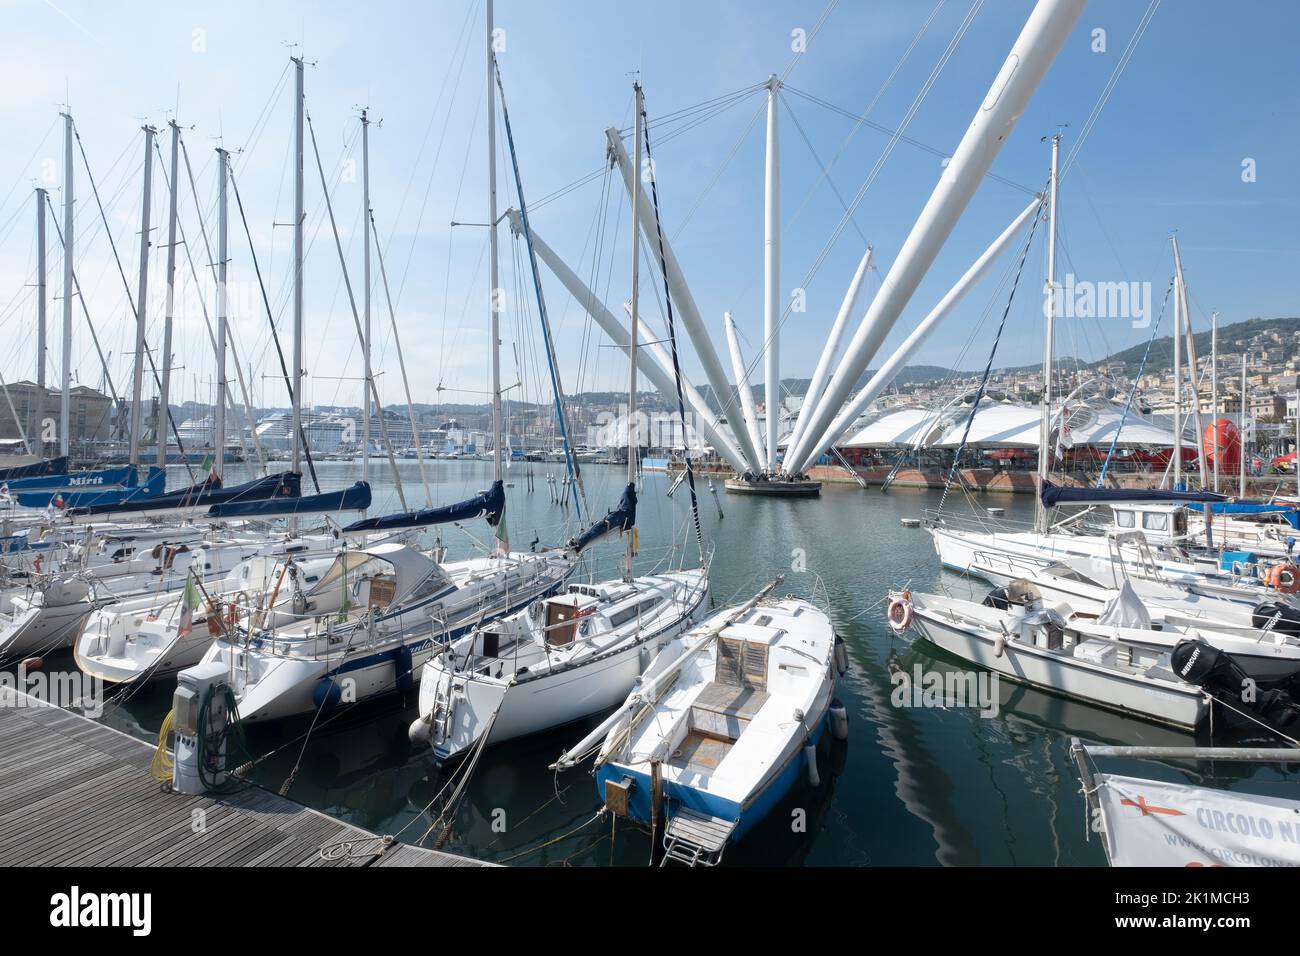 The Old Port of Genoa, where a charming waterfront plaza, the work of famous Genoese architect Renzo Piano,Genova, Liguria, Italy Stock Photo